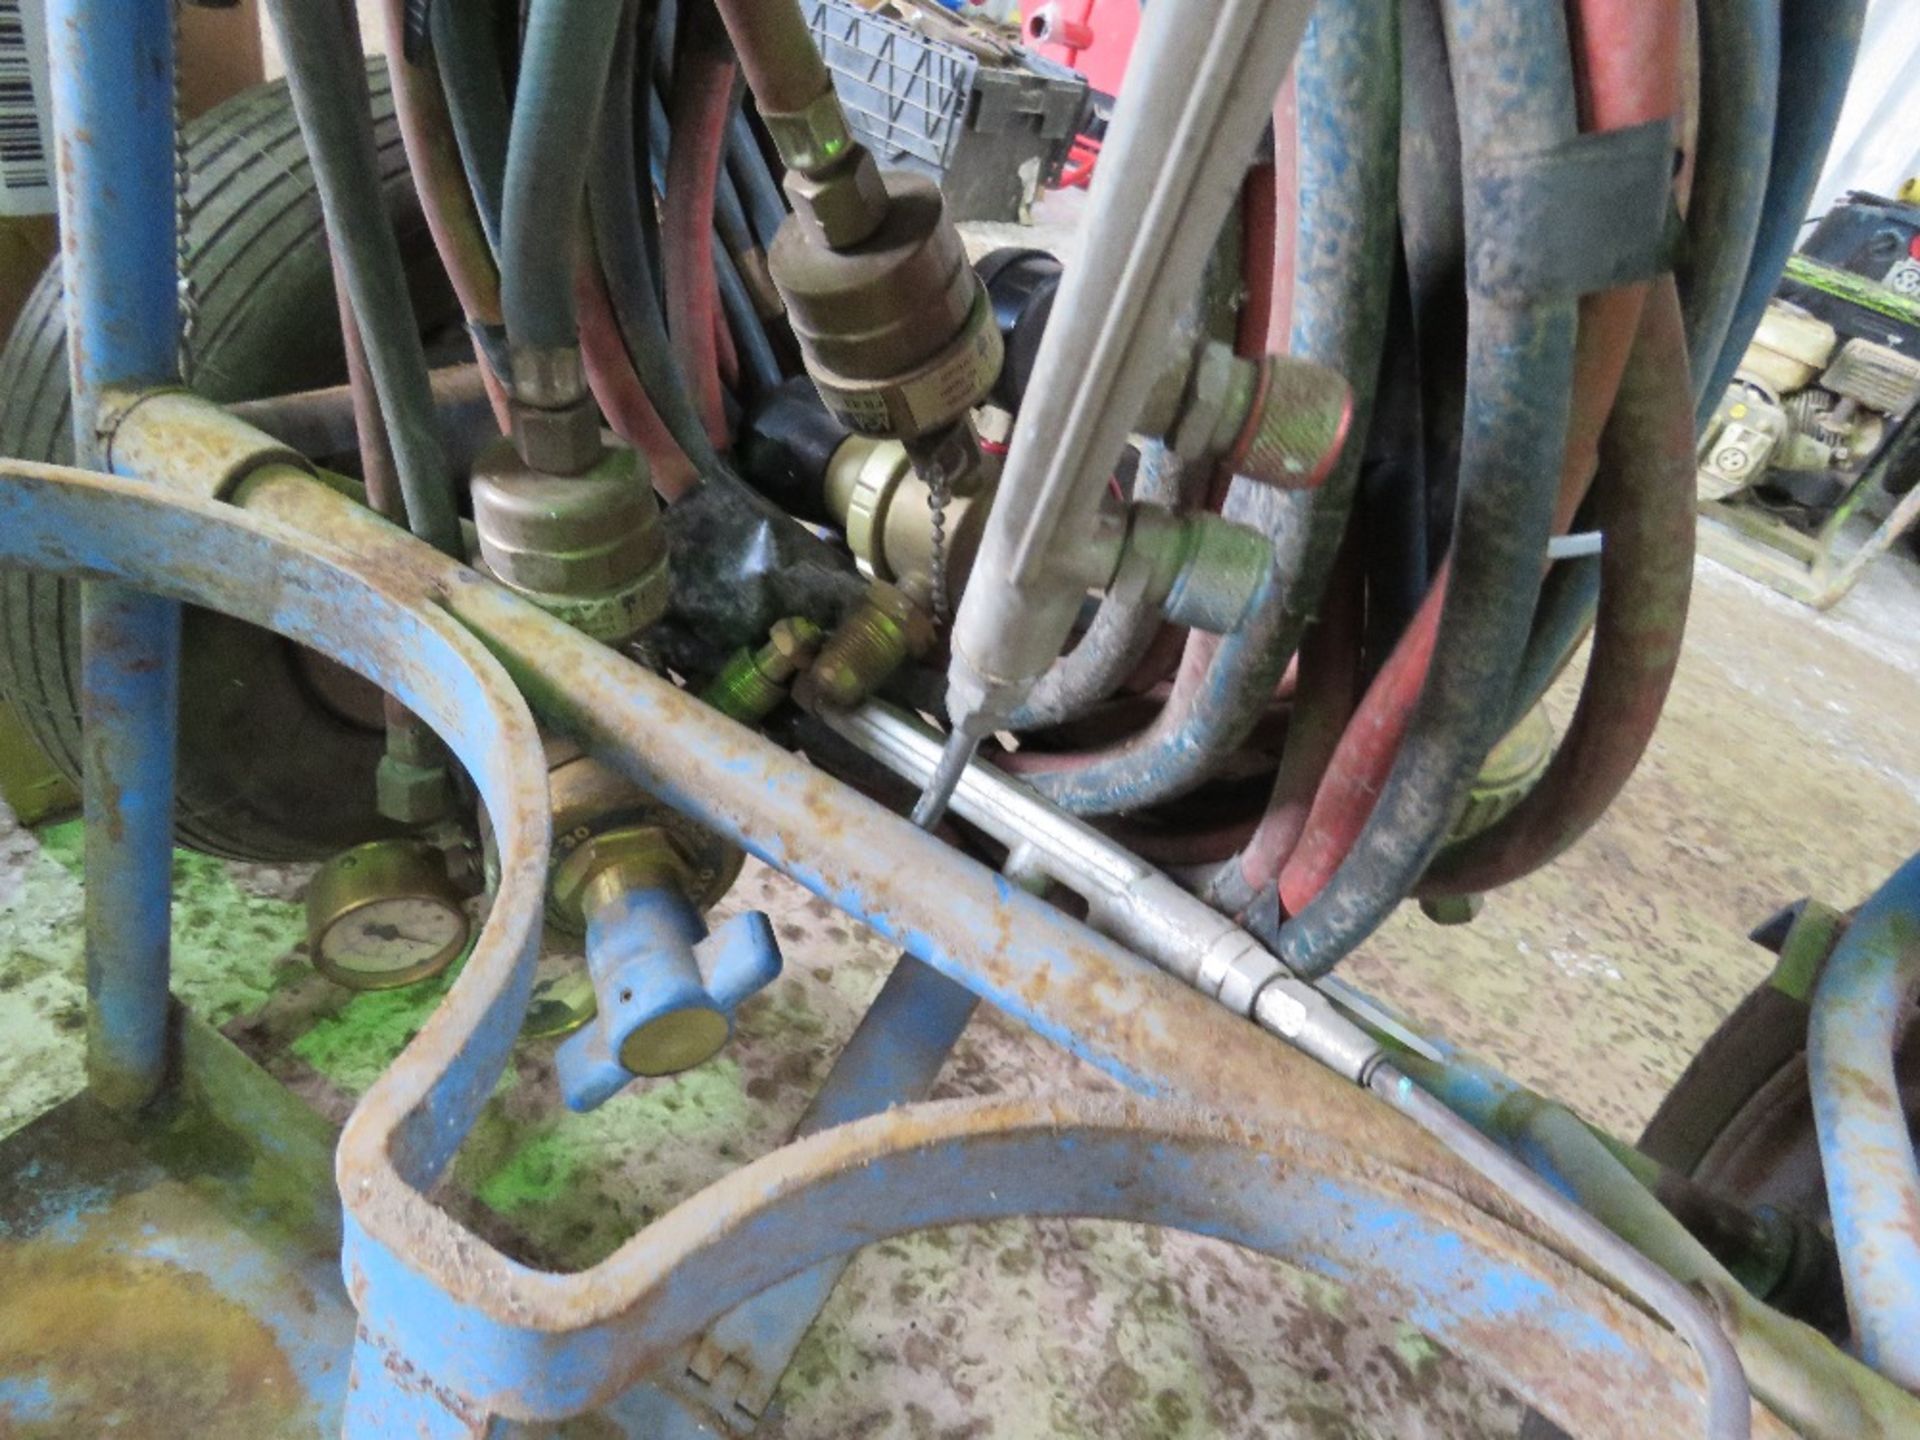 2 X SETS OF OXY-ACETELENE GAS HOSES PLUS A BARROW.....THIS LOT IS SOLD UNDER THE AUCTIONEERS MARGIN - Image 7 of 7